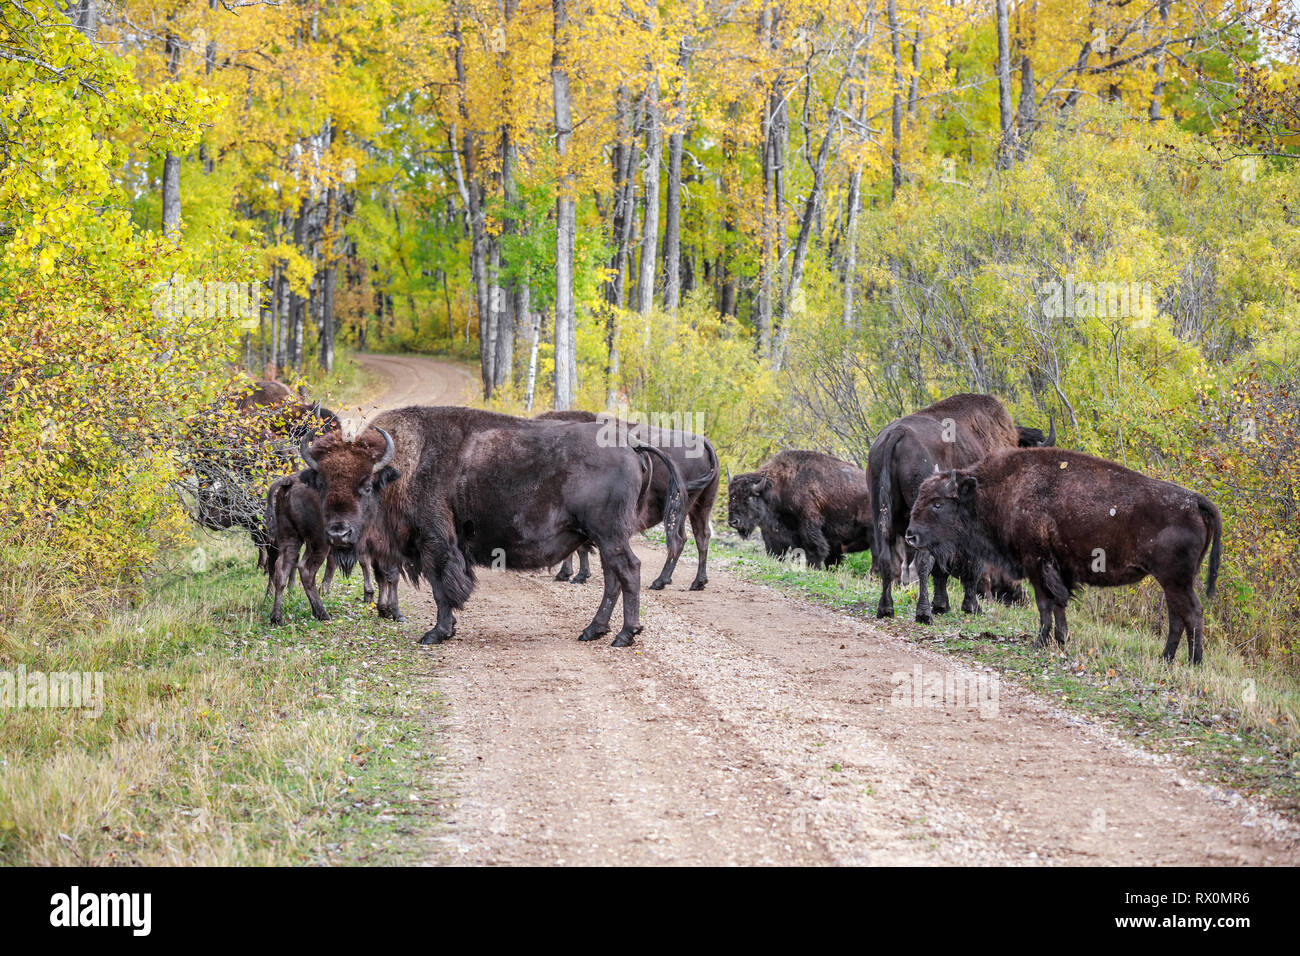 Herd of Plains Bison, standing on road in autumn colors, Riding Mountain National Park, Manitoba, Canada. Stock Photo